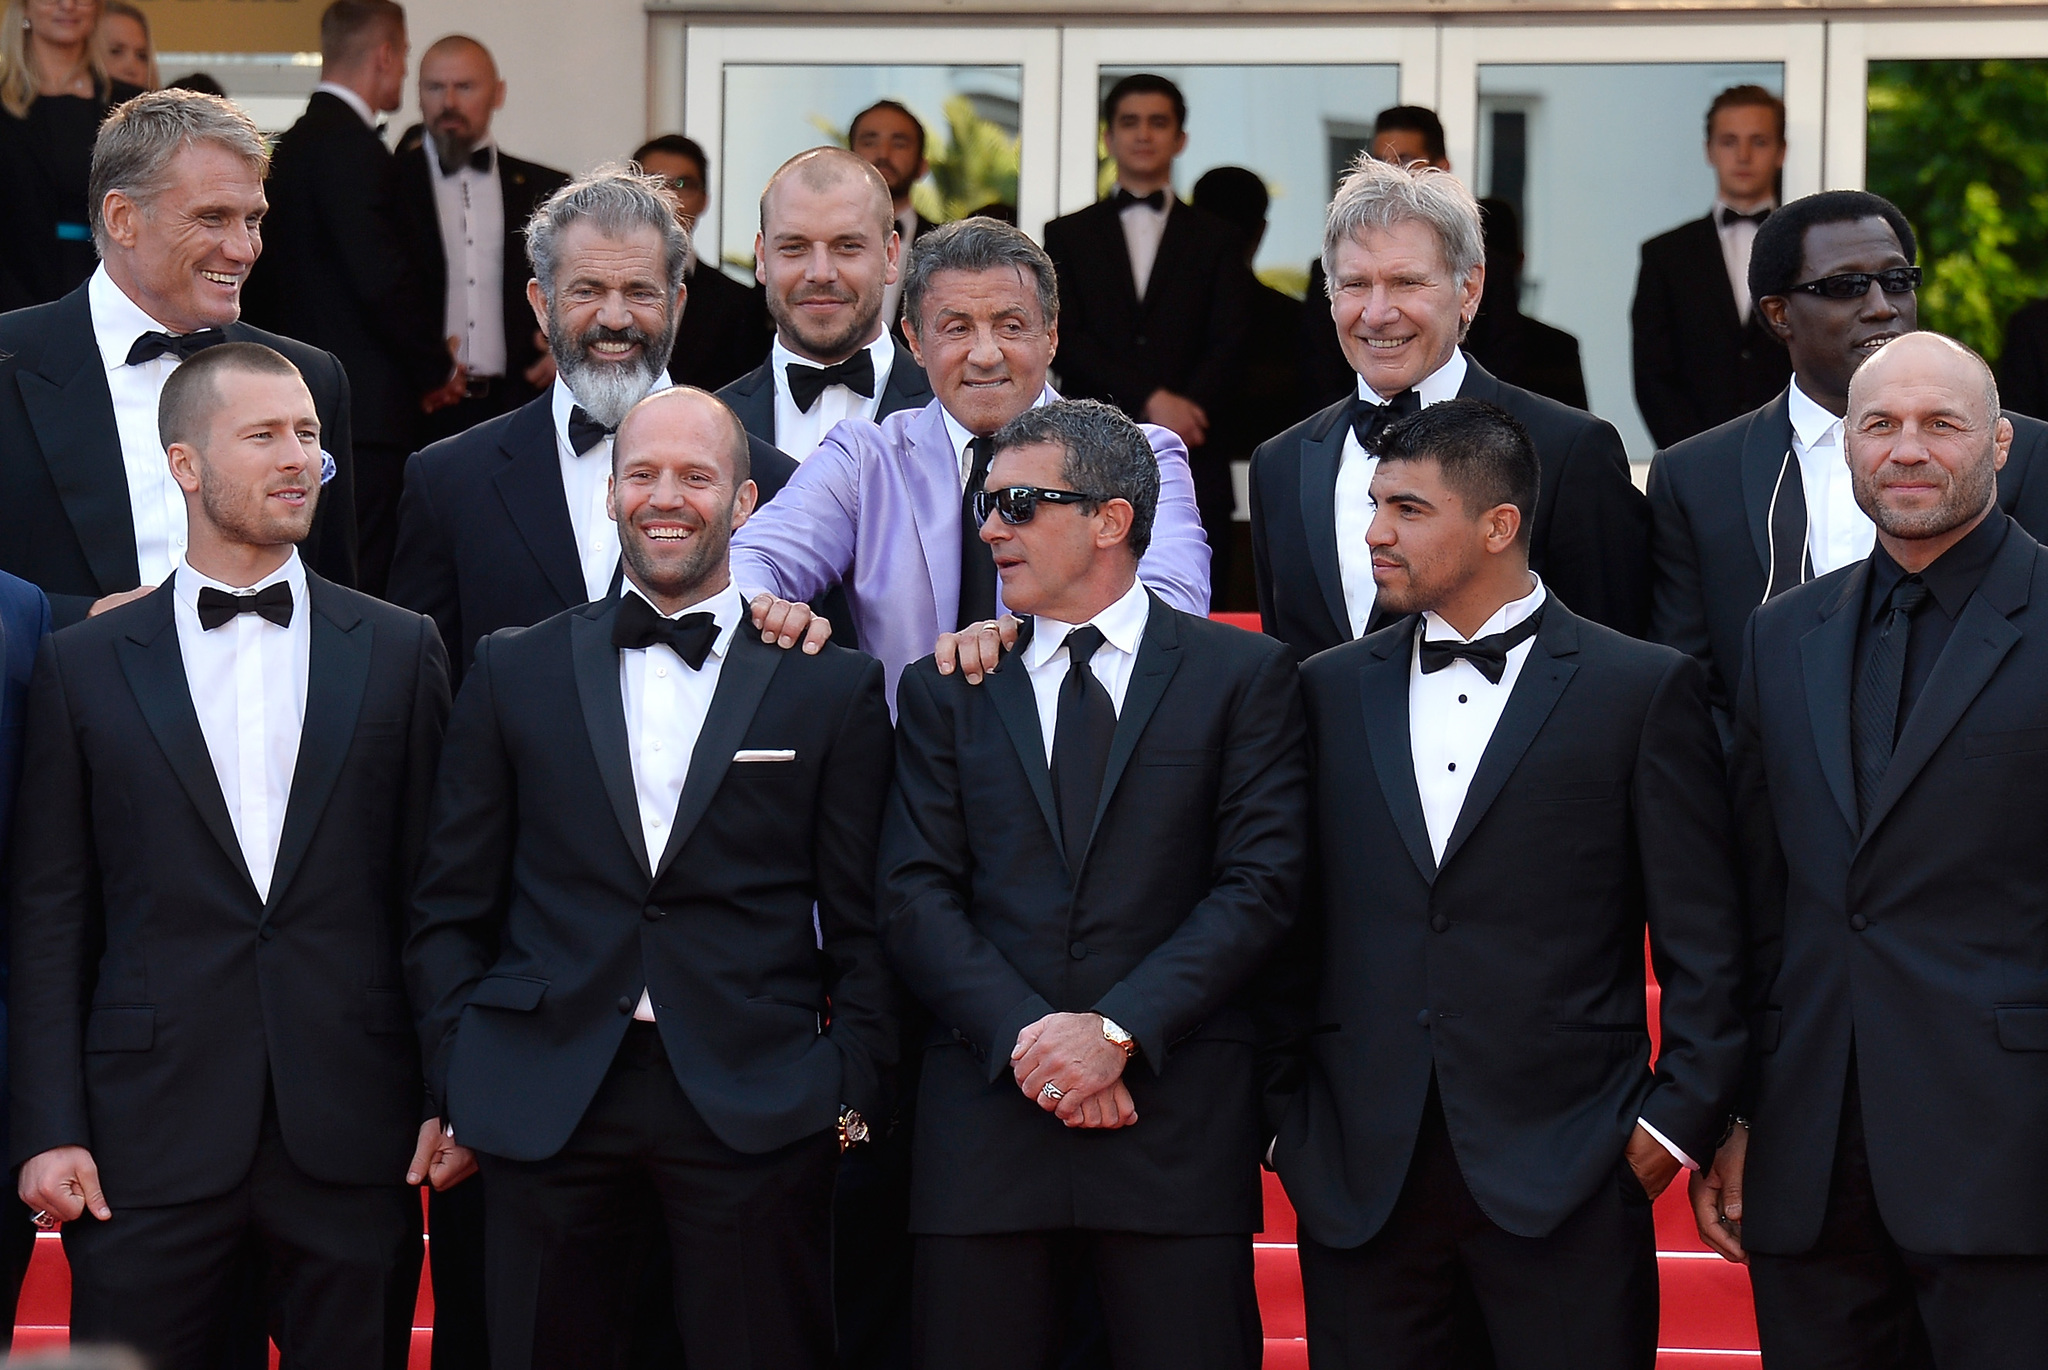 Antonio Banderas, Harrison Ford, Mel Gibson, Dolph Lundgren, Sylvester Stallone, Wesley Snipes, Jason Statham, Patrick Hughes, Randy Couture, Glen Powell and Victor Ortiz at event of Nesunaikinami 3 (2014)